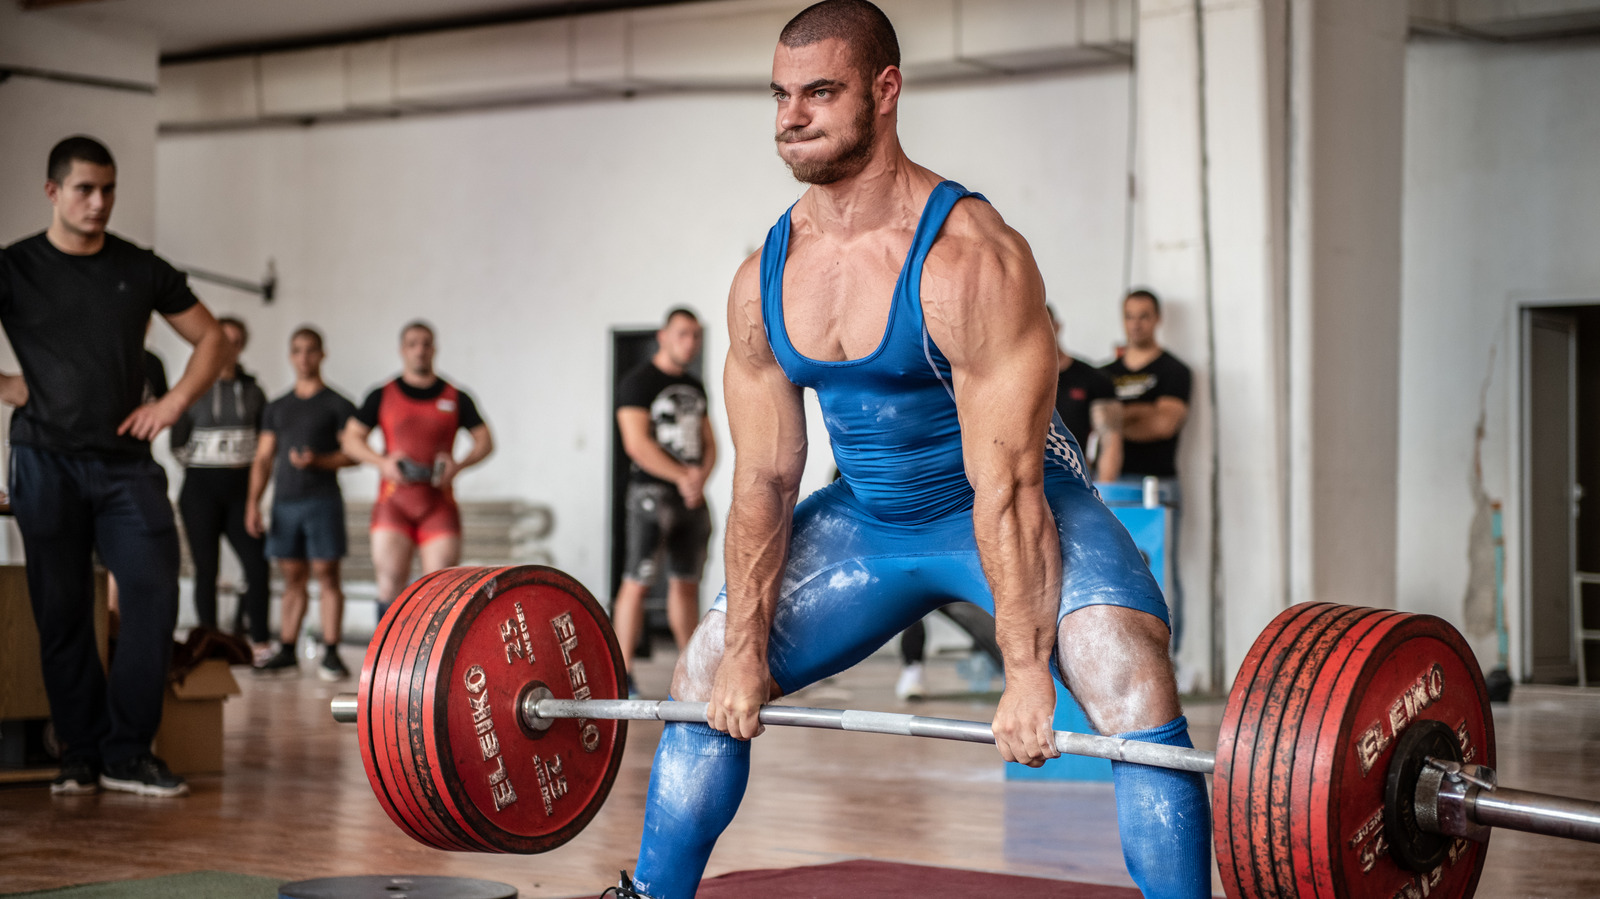 Powerlifting: A Test of Strength and Determination